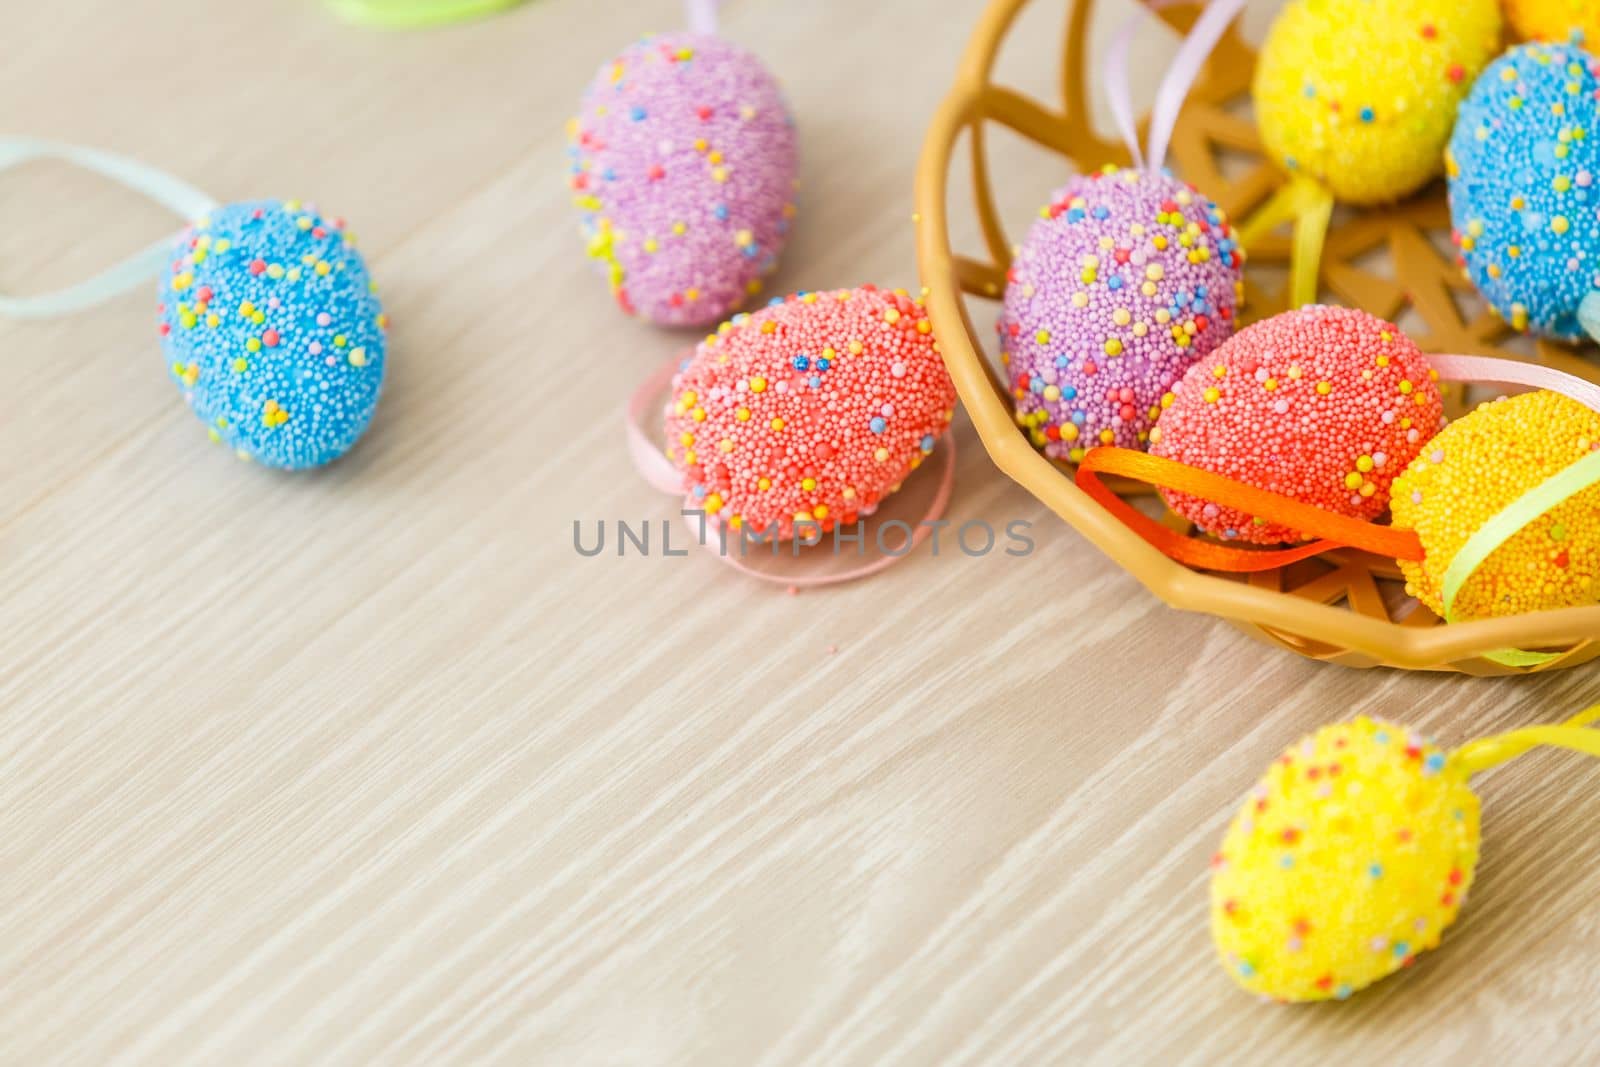 Easter eggs painted in pastel colors on a white background